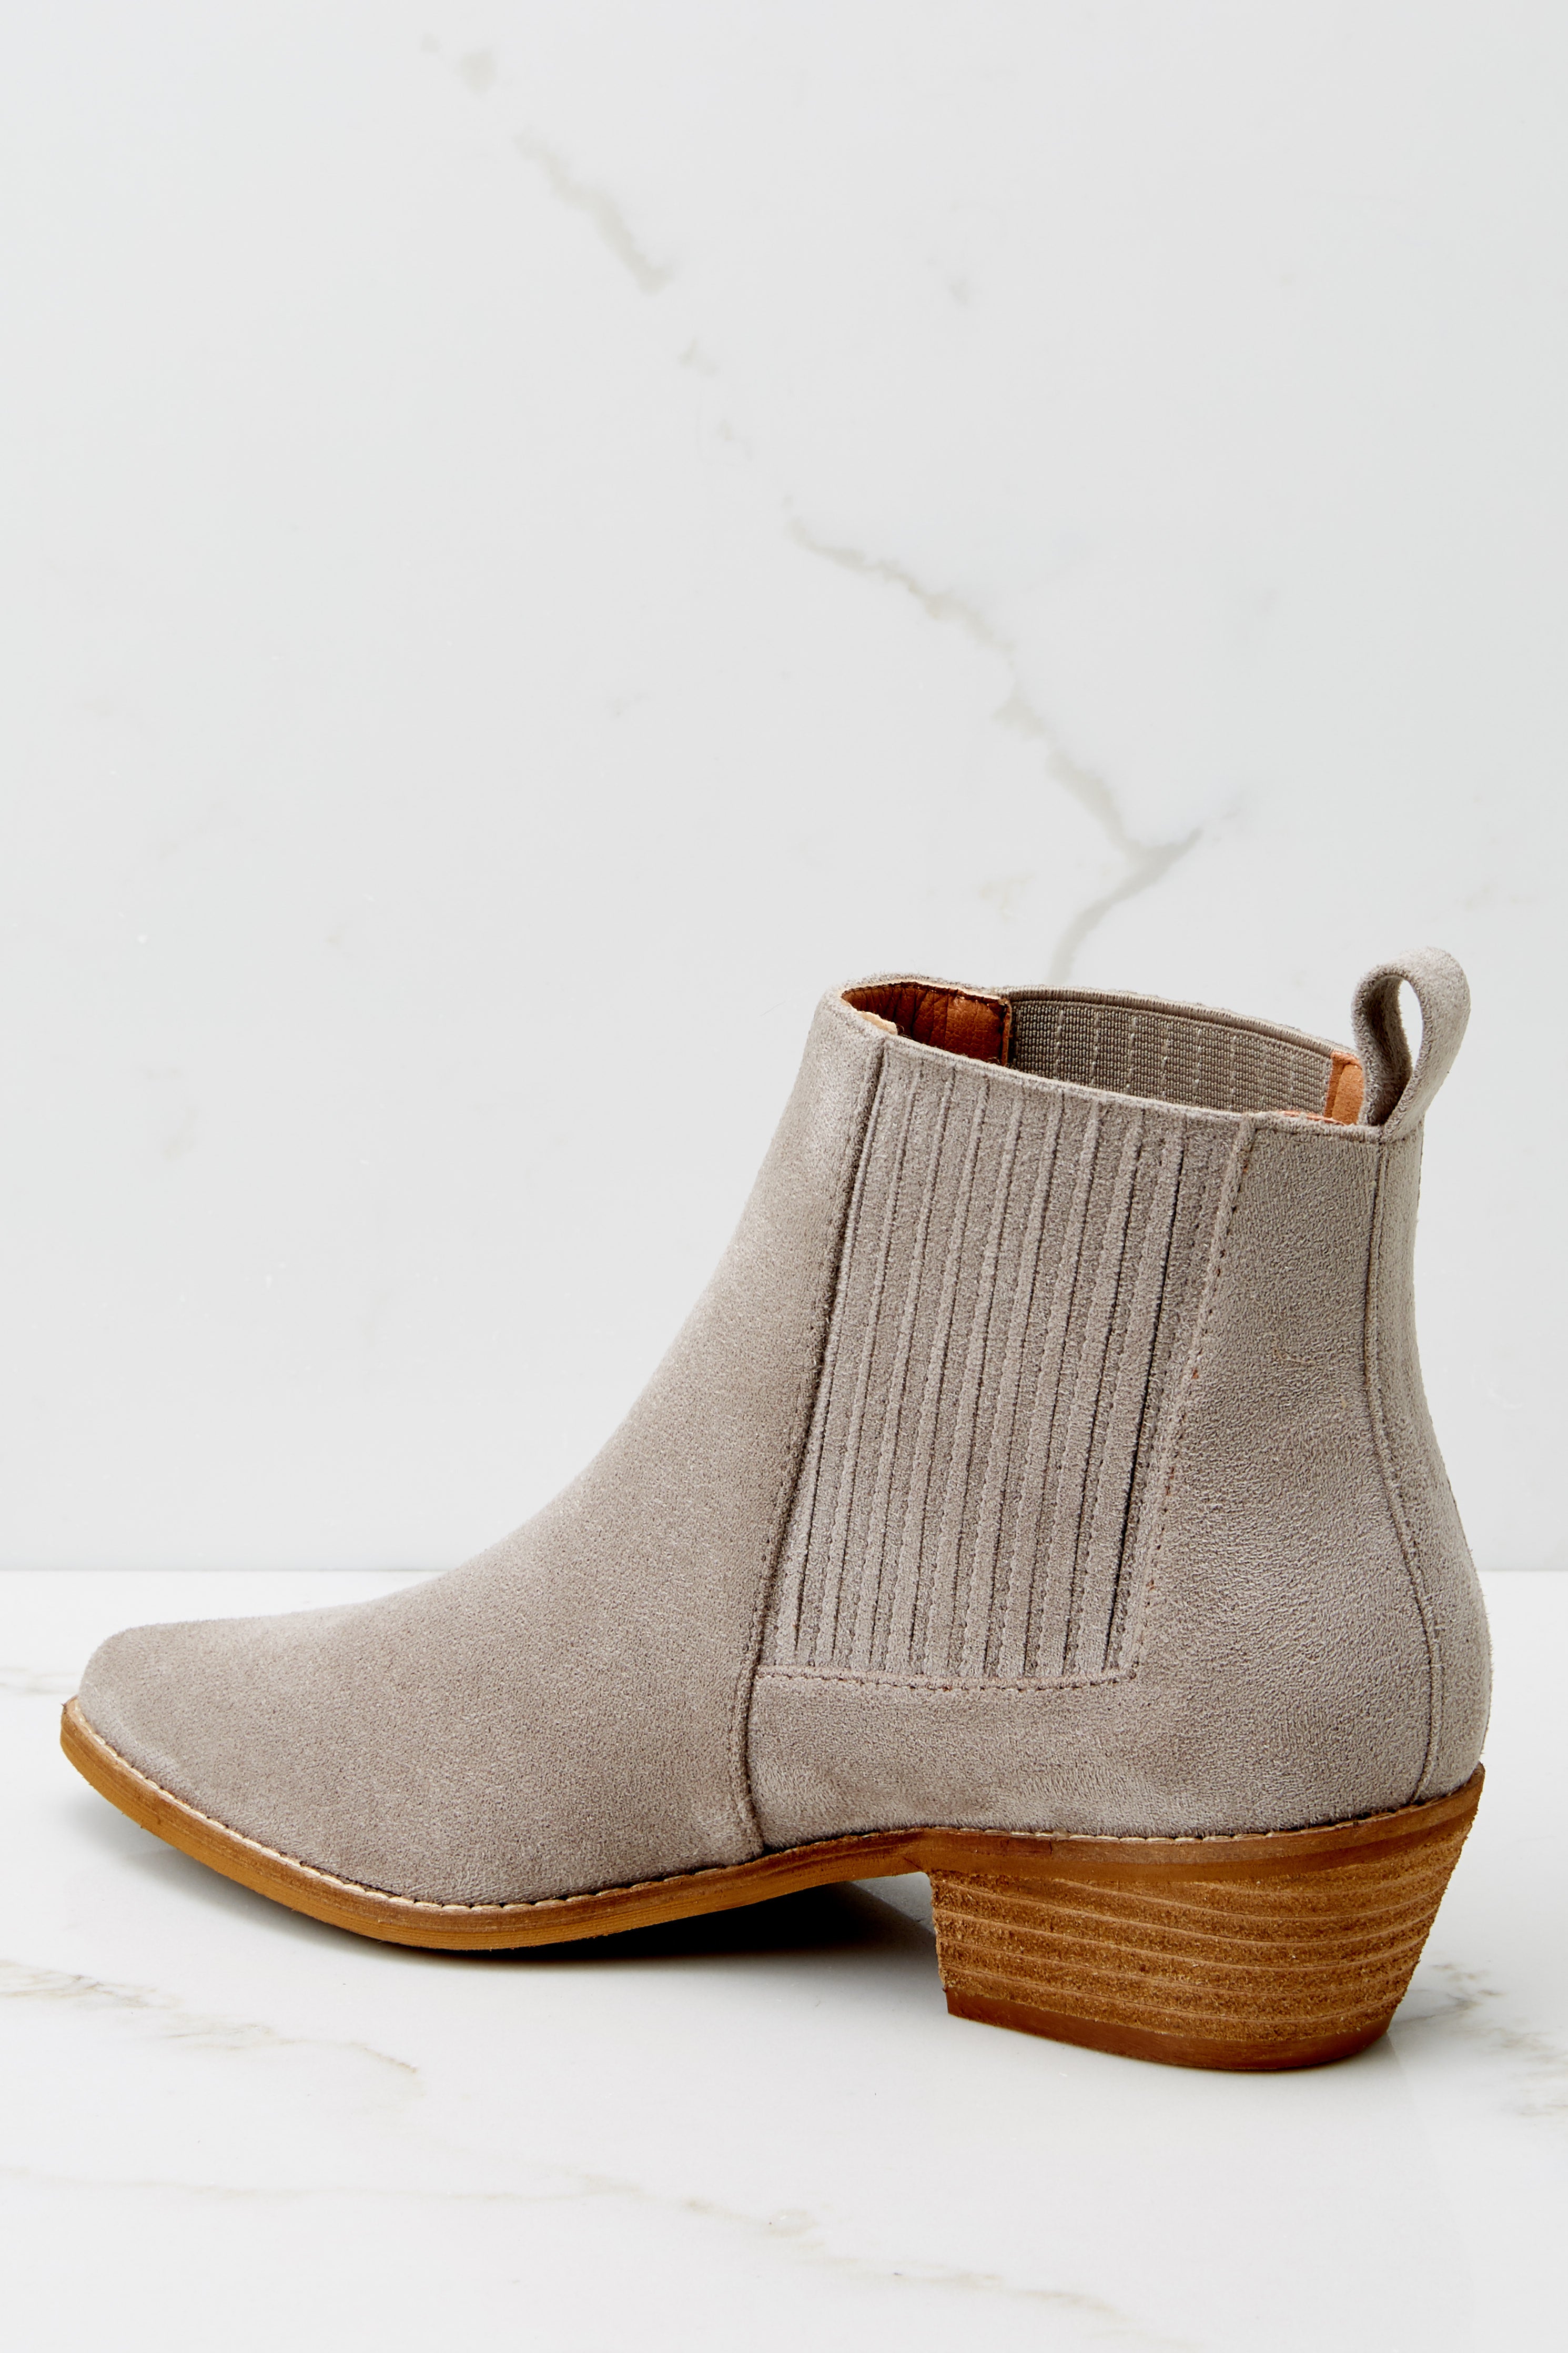 6 Seen You Before Grey Ankle Booties at reddress.com